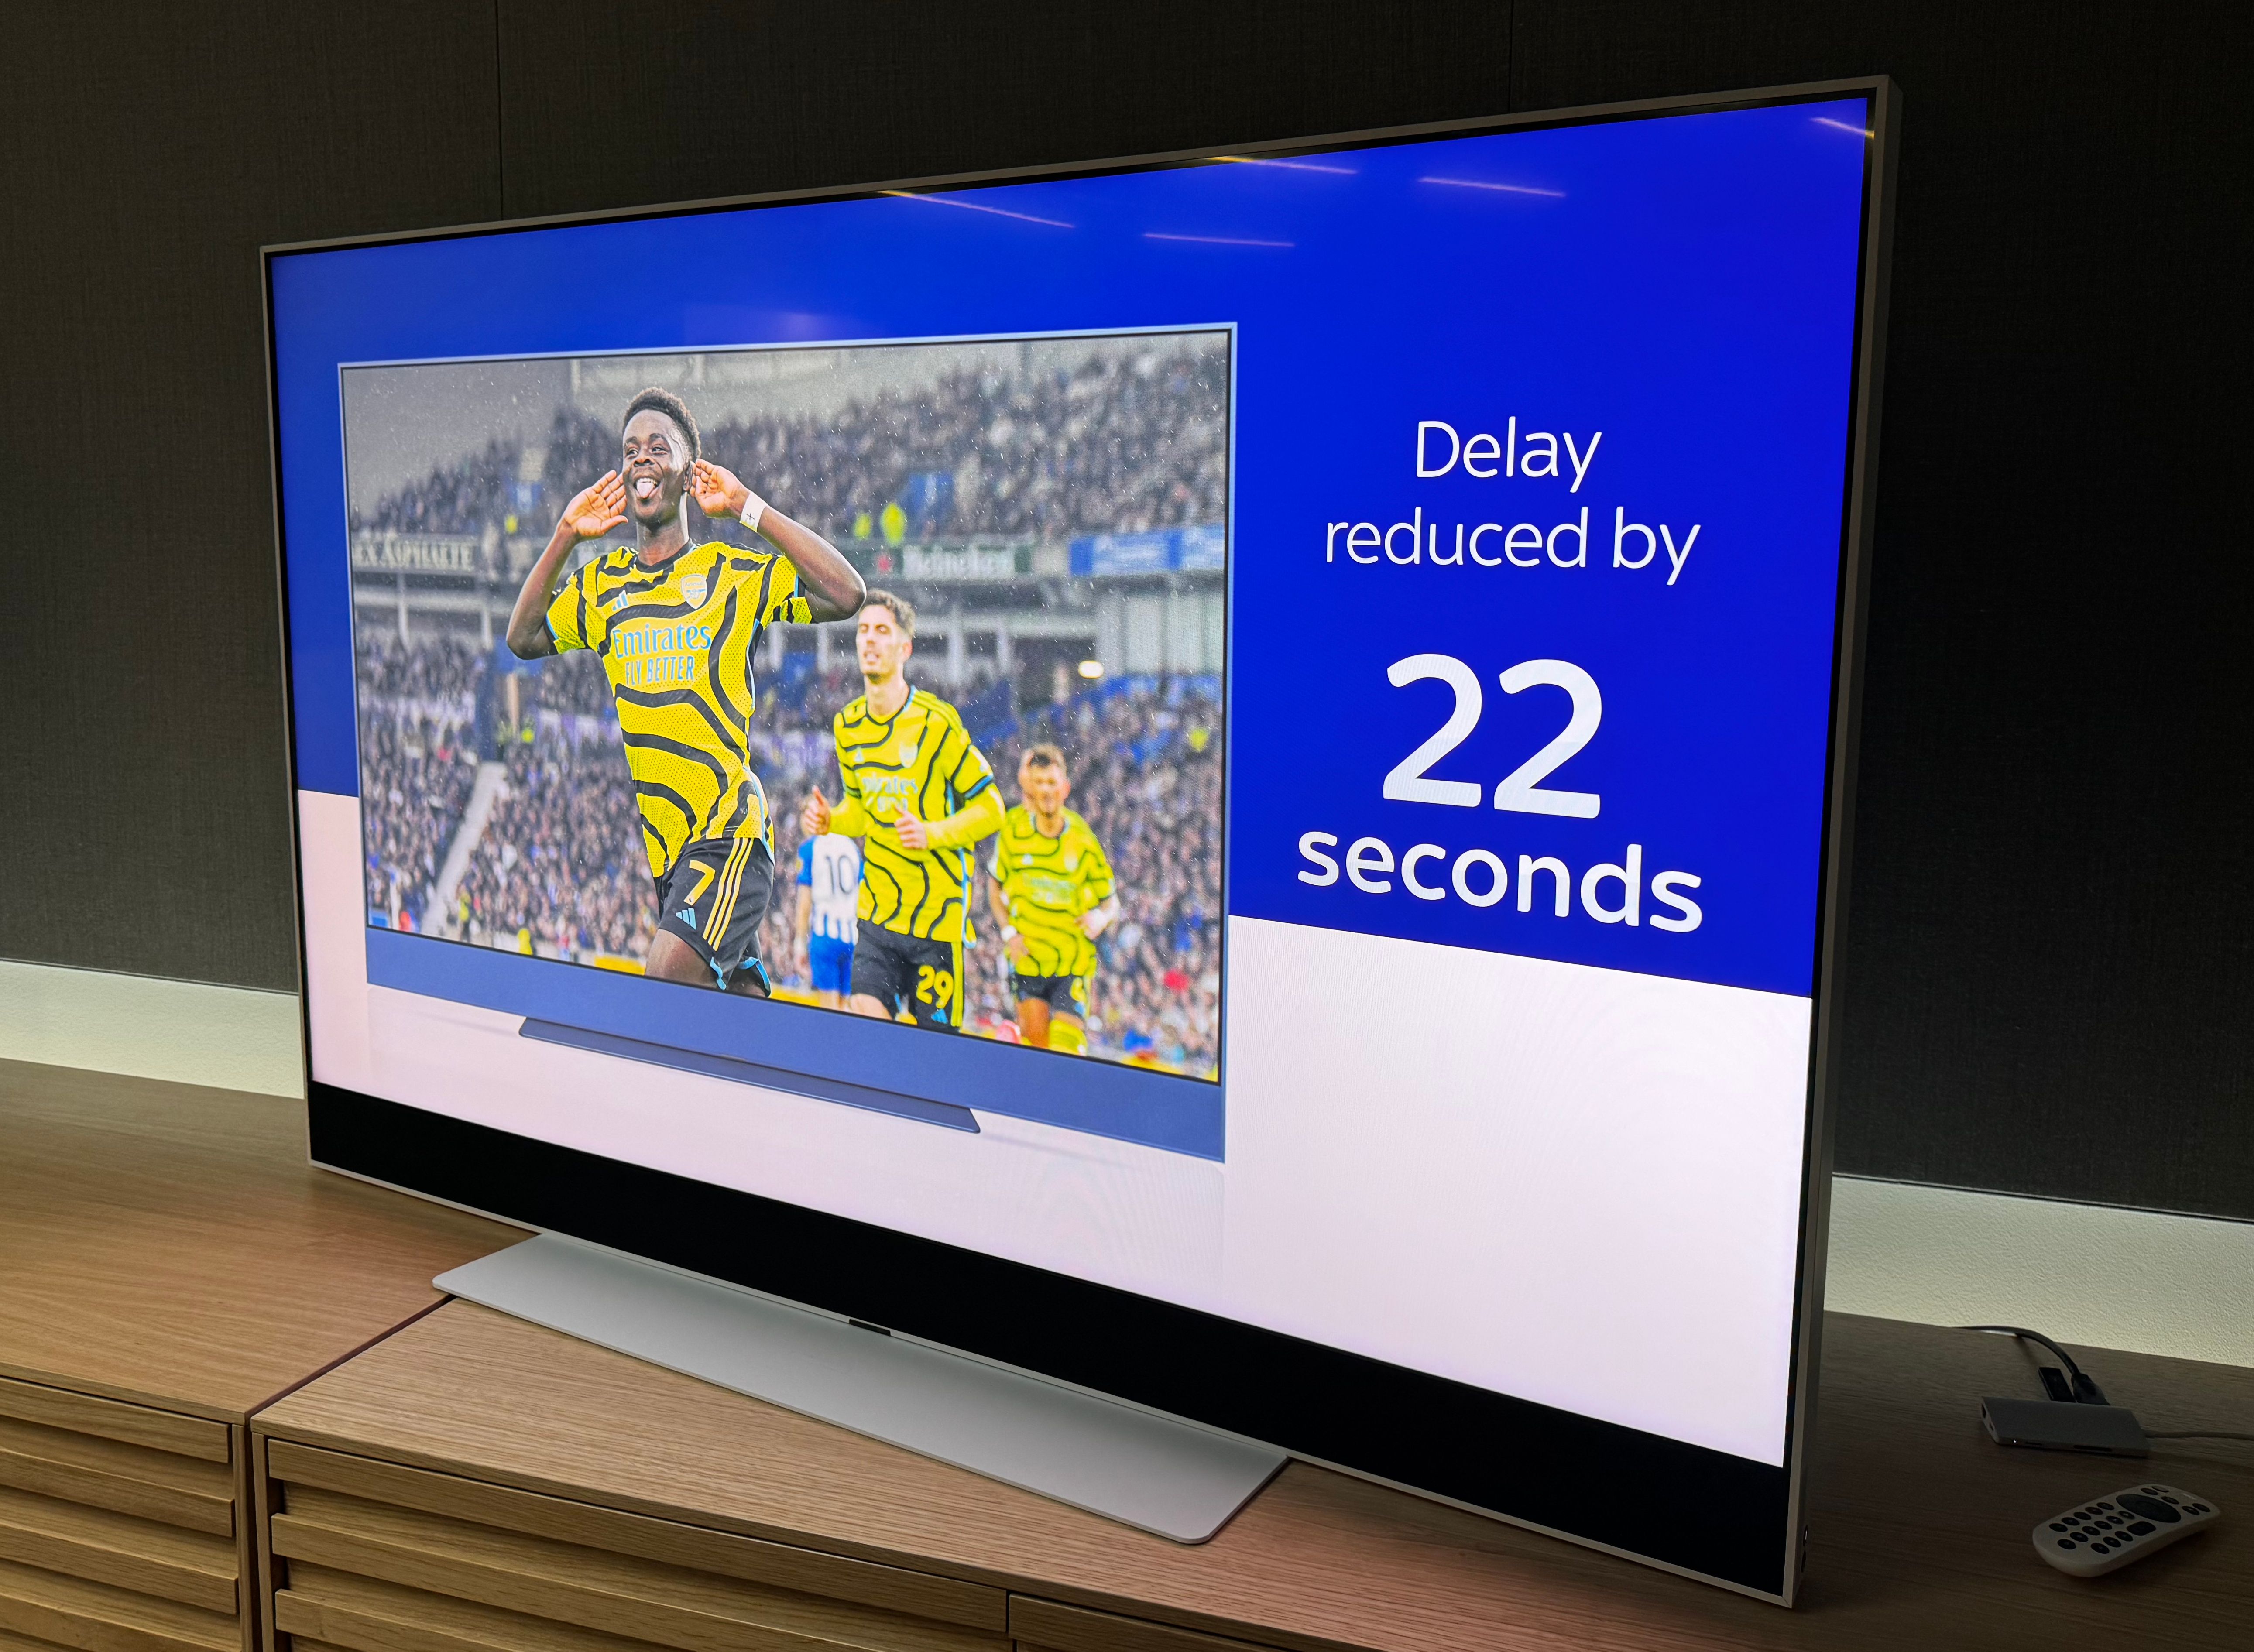 sky glass with the 22 second delay announcement pictured on-screen